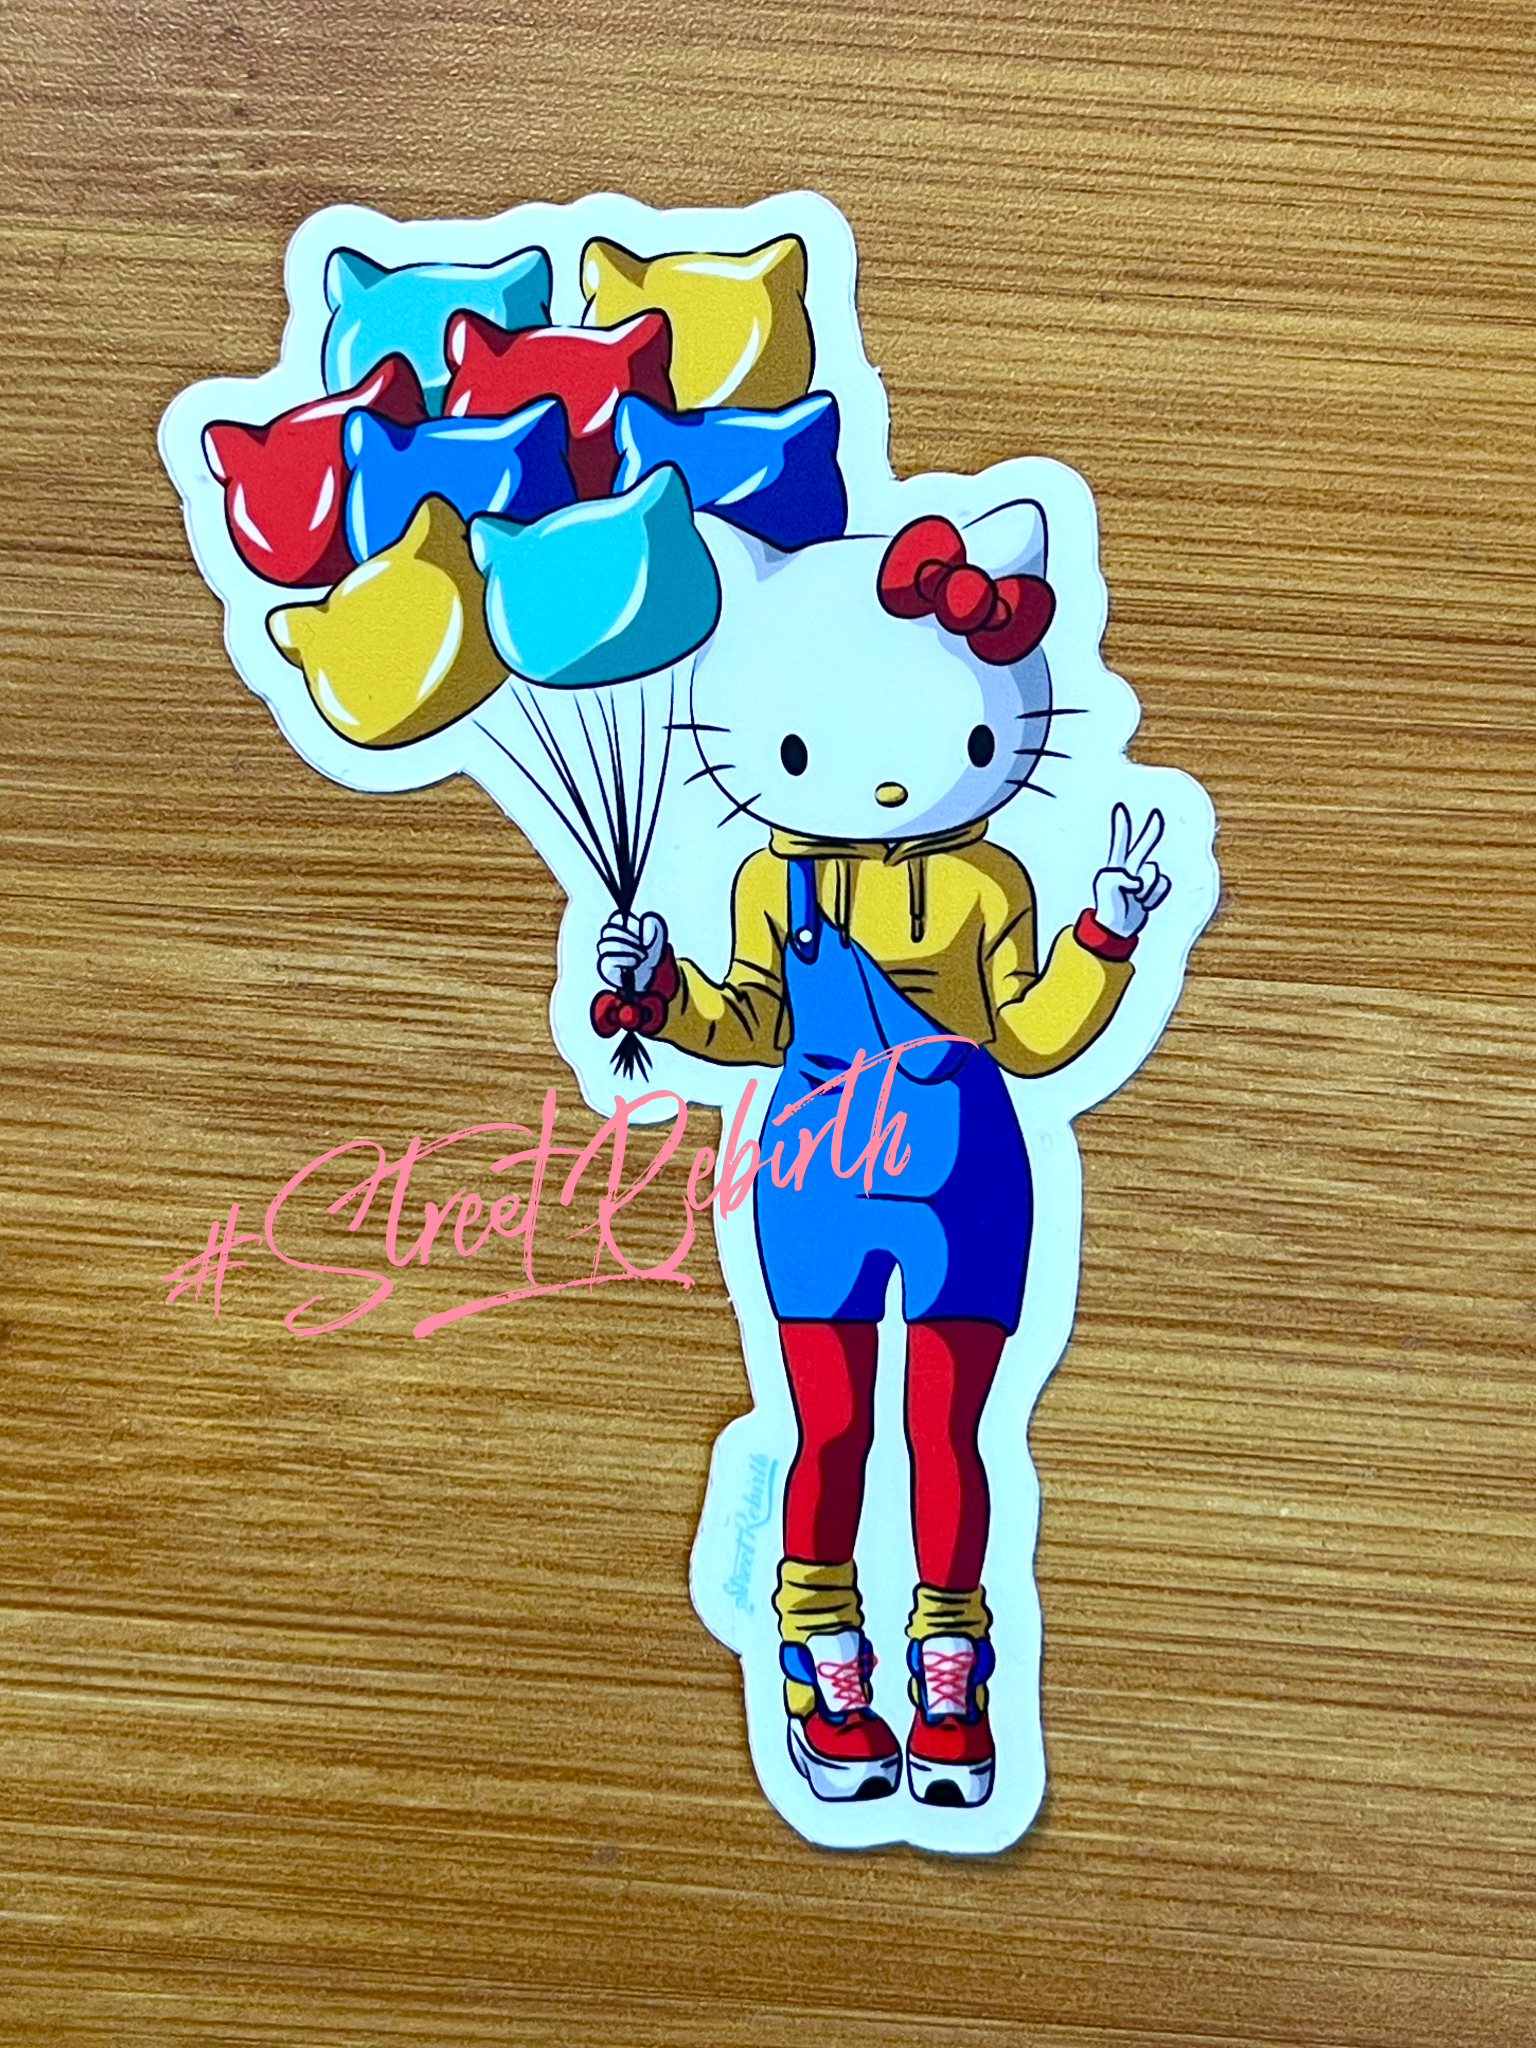 Kitty Grown Up Sticker – One 4 Inch Water Proof Vinyl Sticker – For Hydro Flask, Skateboard, Laptop, Planner, Car, Collecting, Gifting